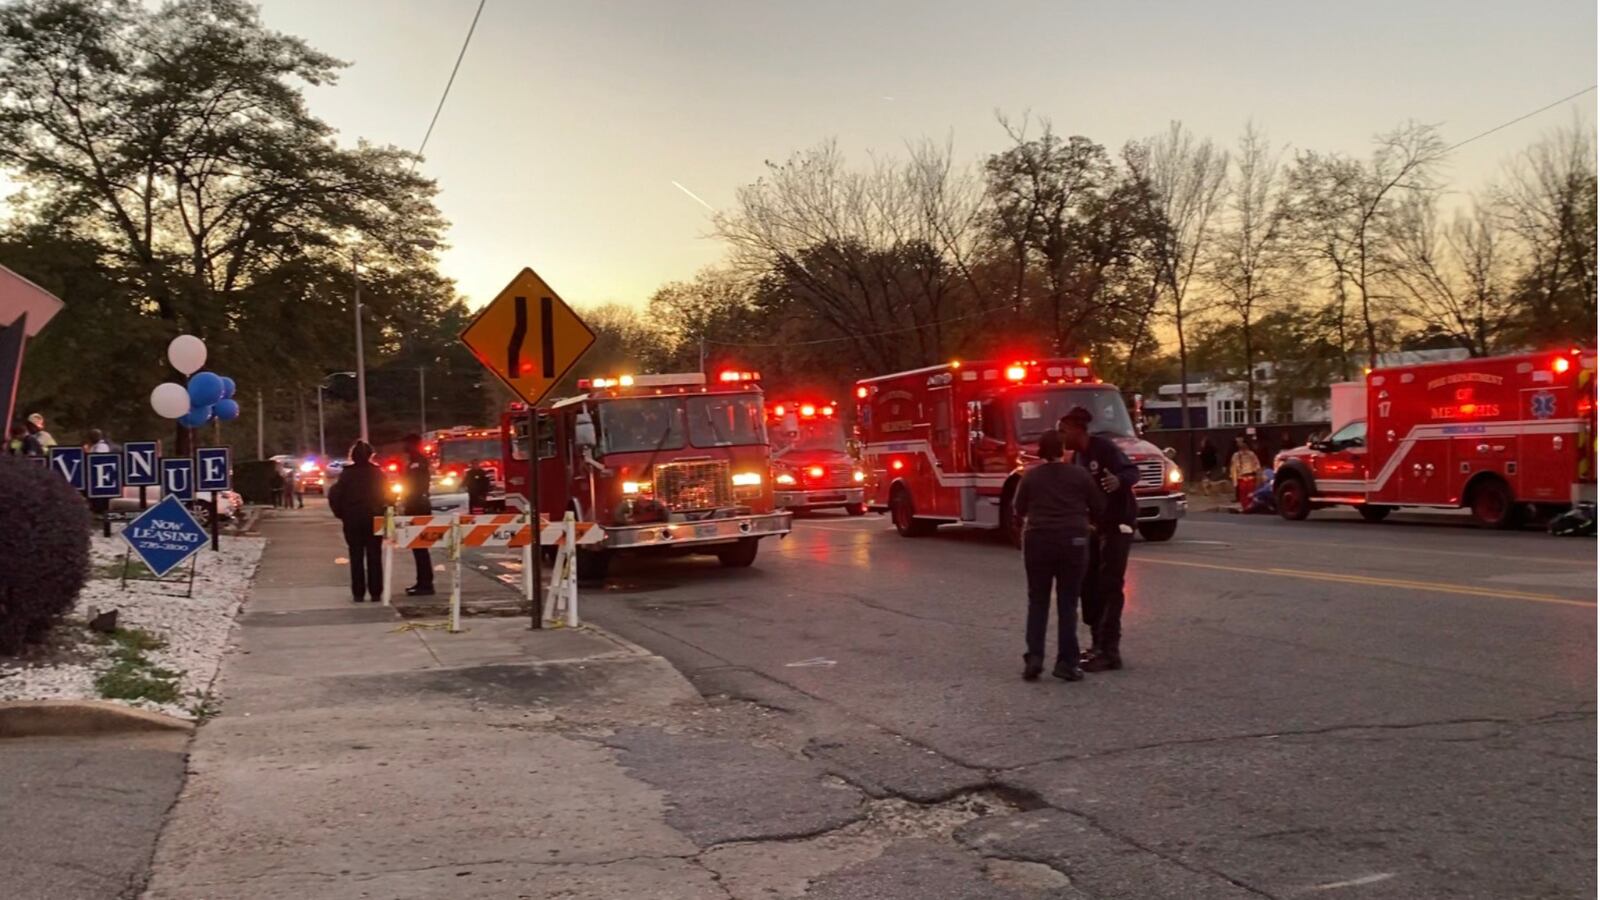 Crews from the Memphis Fire Department responded to a gas leak at The Venue apartments on Central Avenue on Tuesday, Nov. 22, 2022.